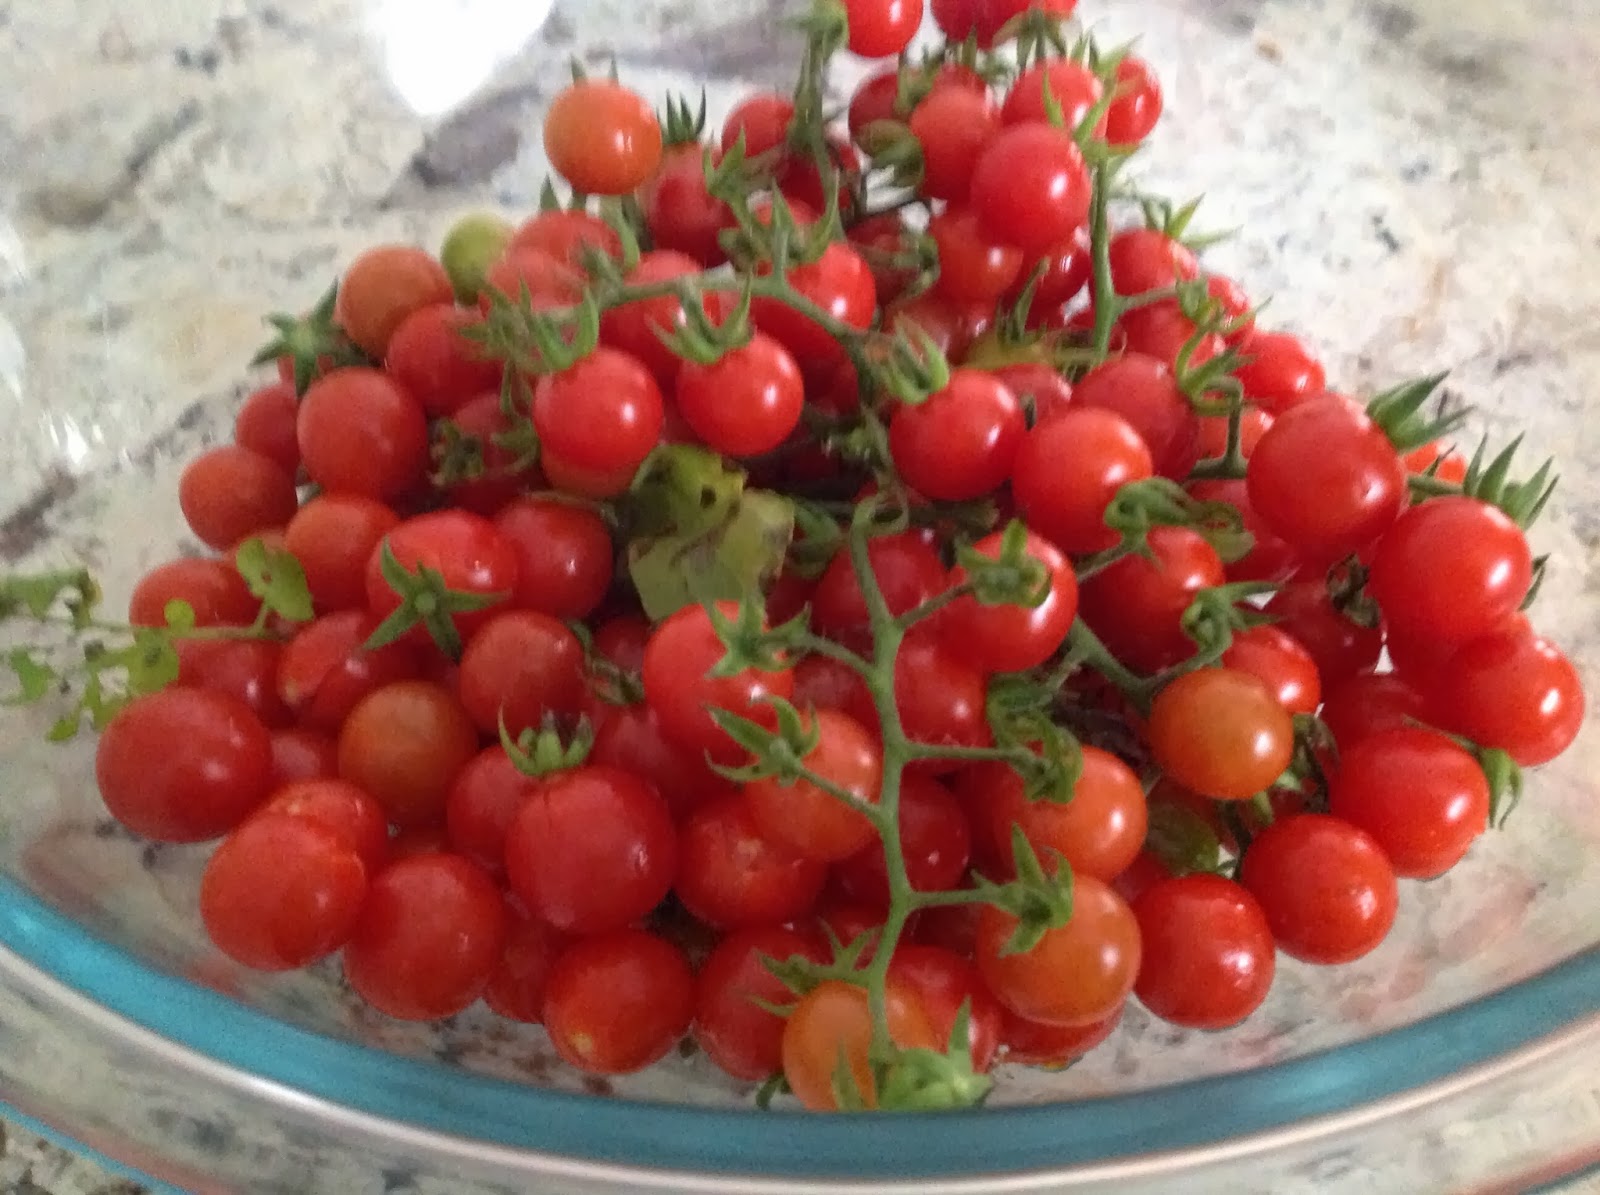 freshly picked bowl of cherry tomatoes with stems